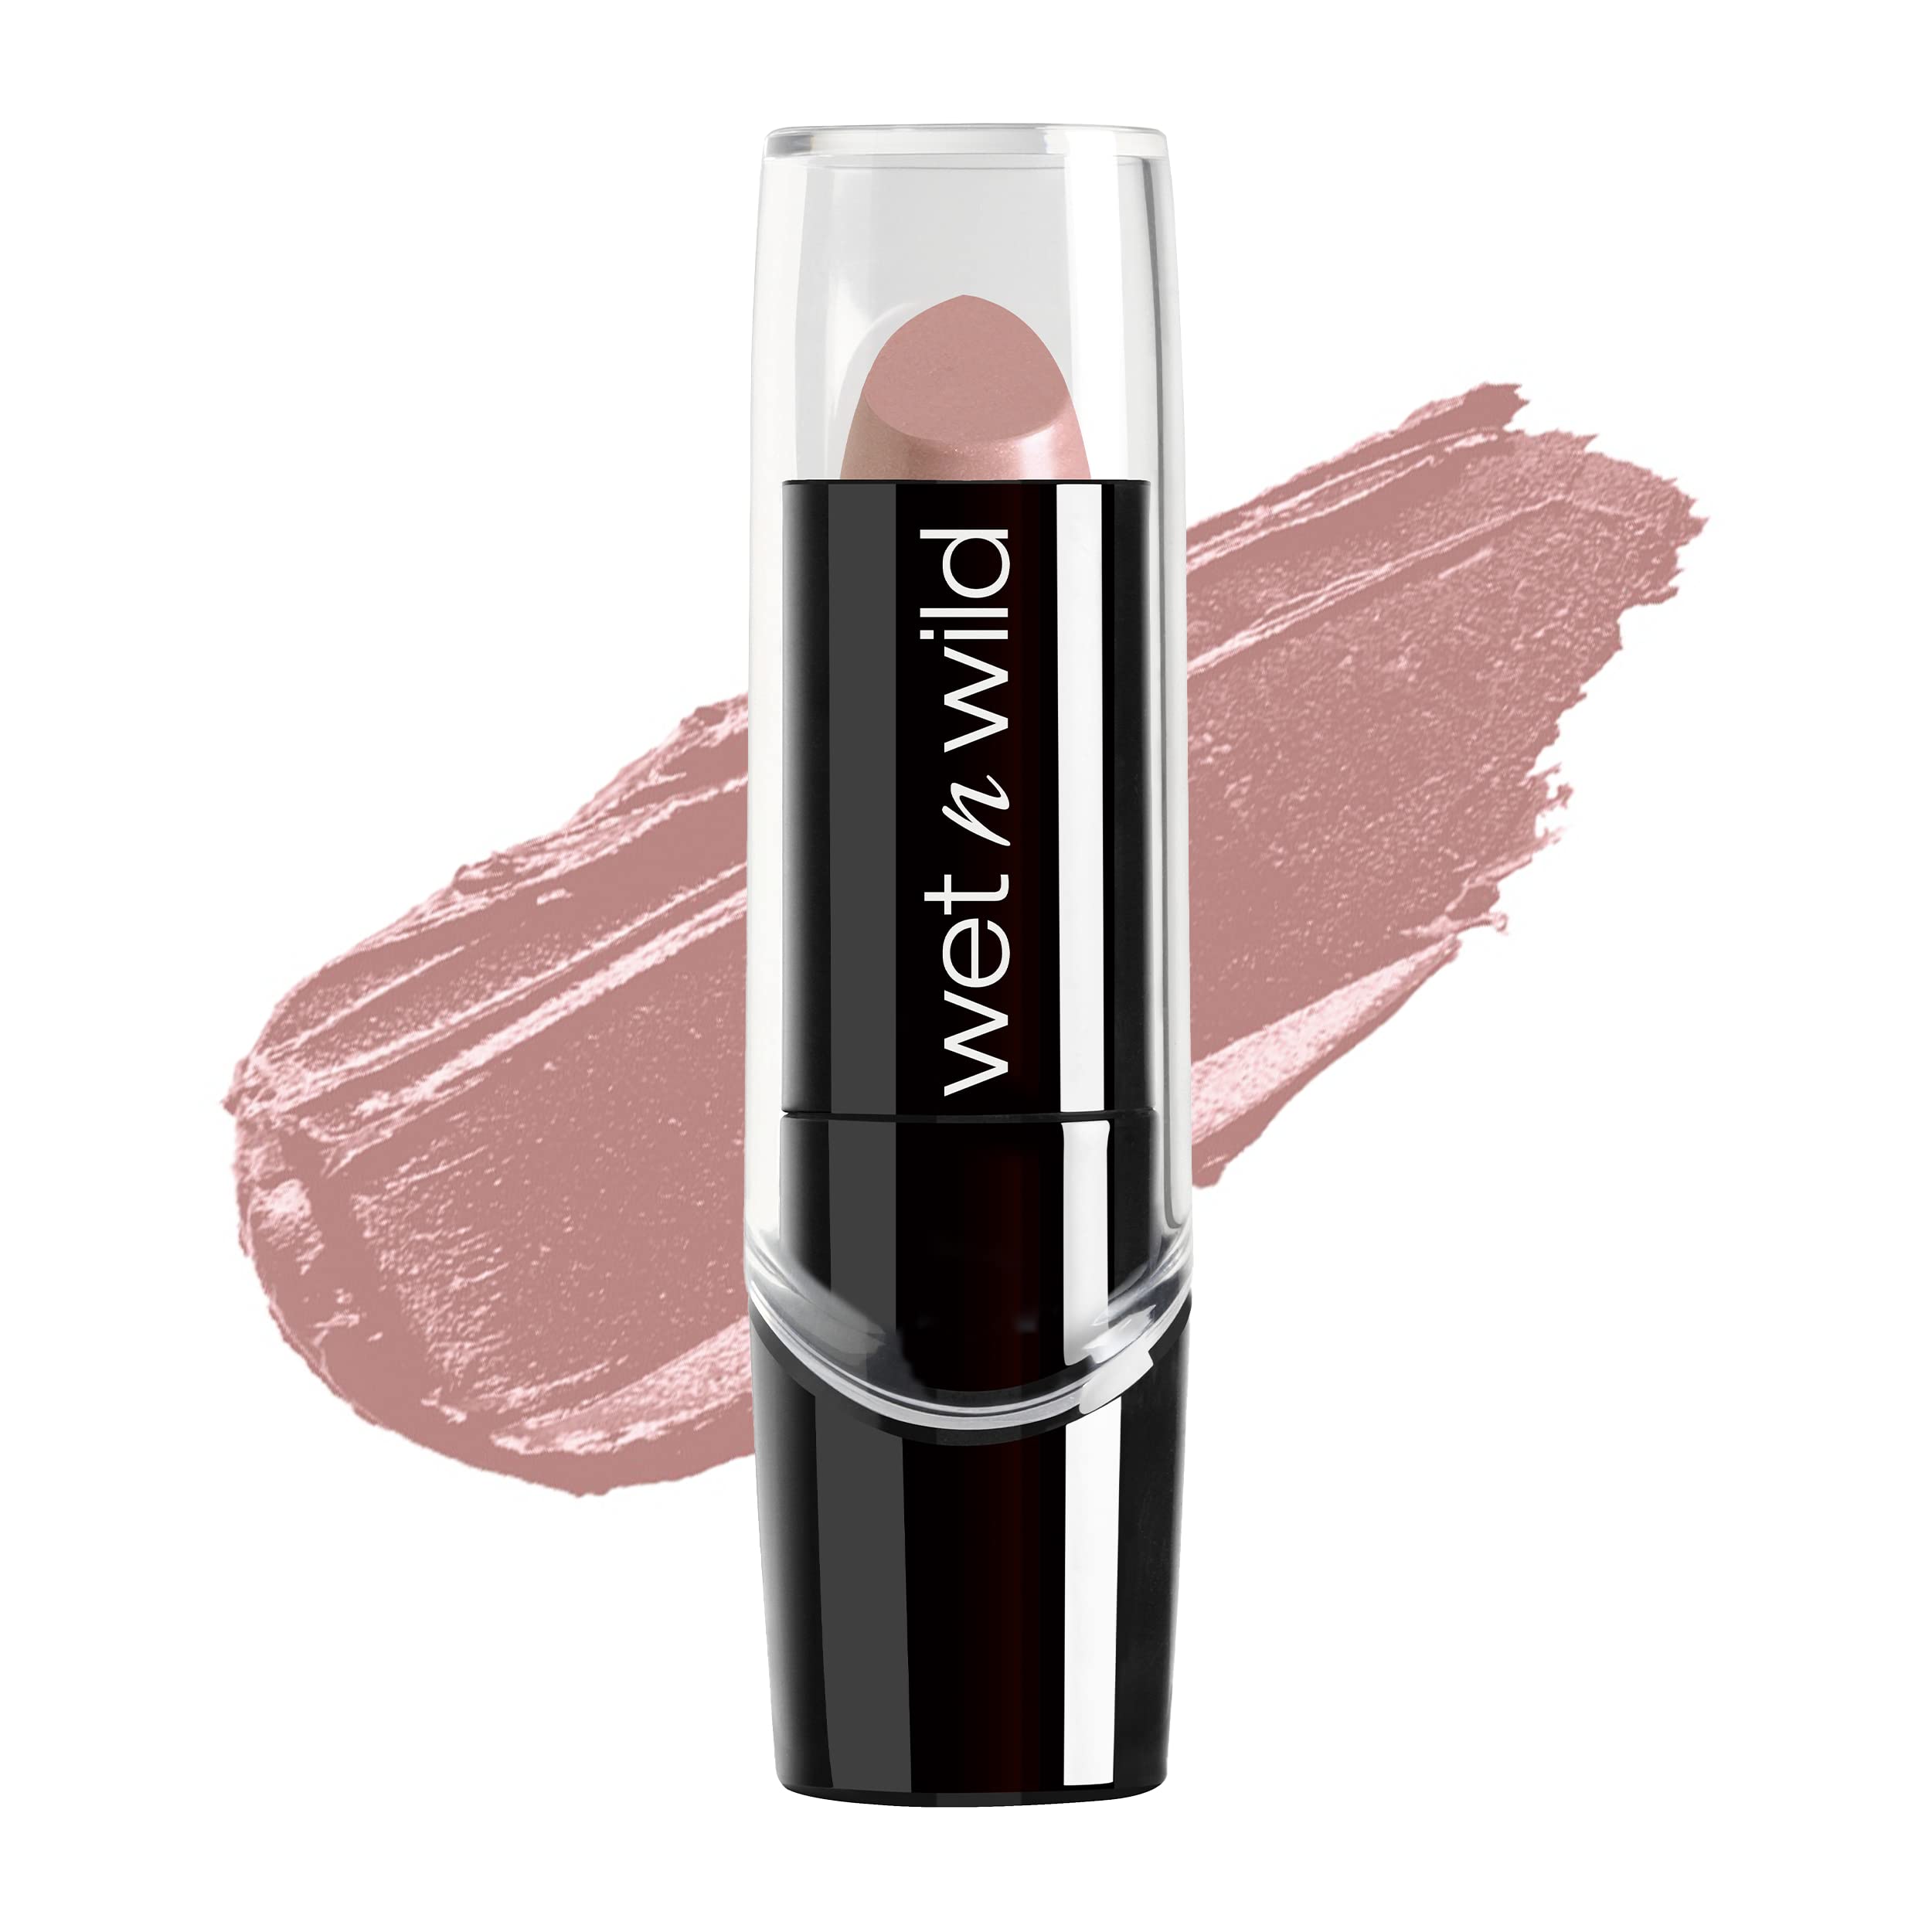 Wet n Wild Silk Finish Lipstick| Hydrating Lip Color| Rich Buildable Color| A Short Affair Pink